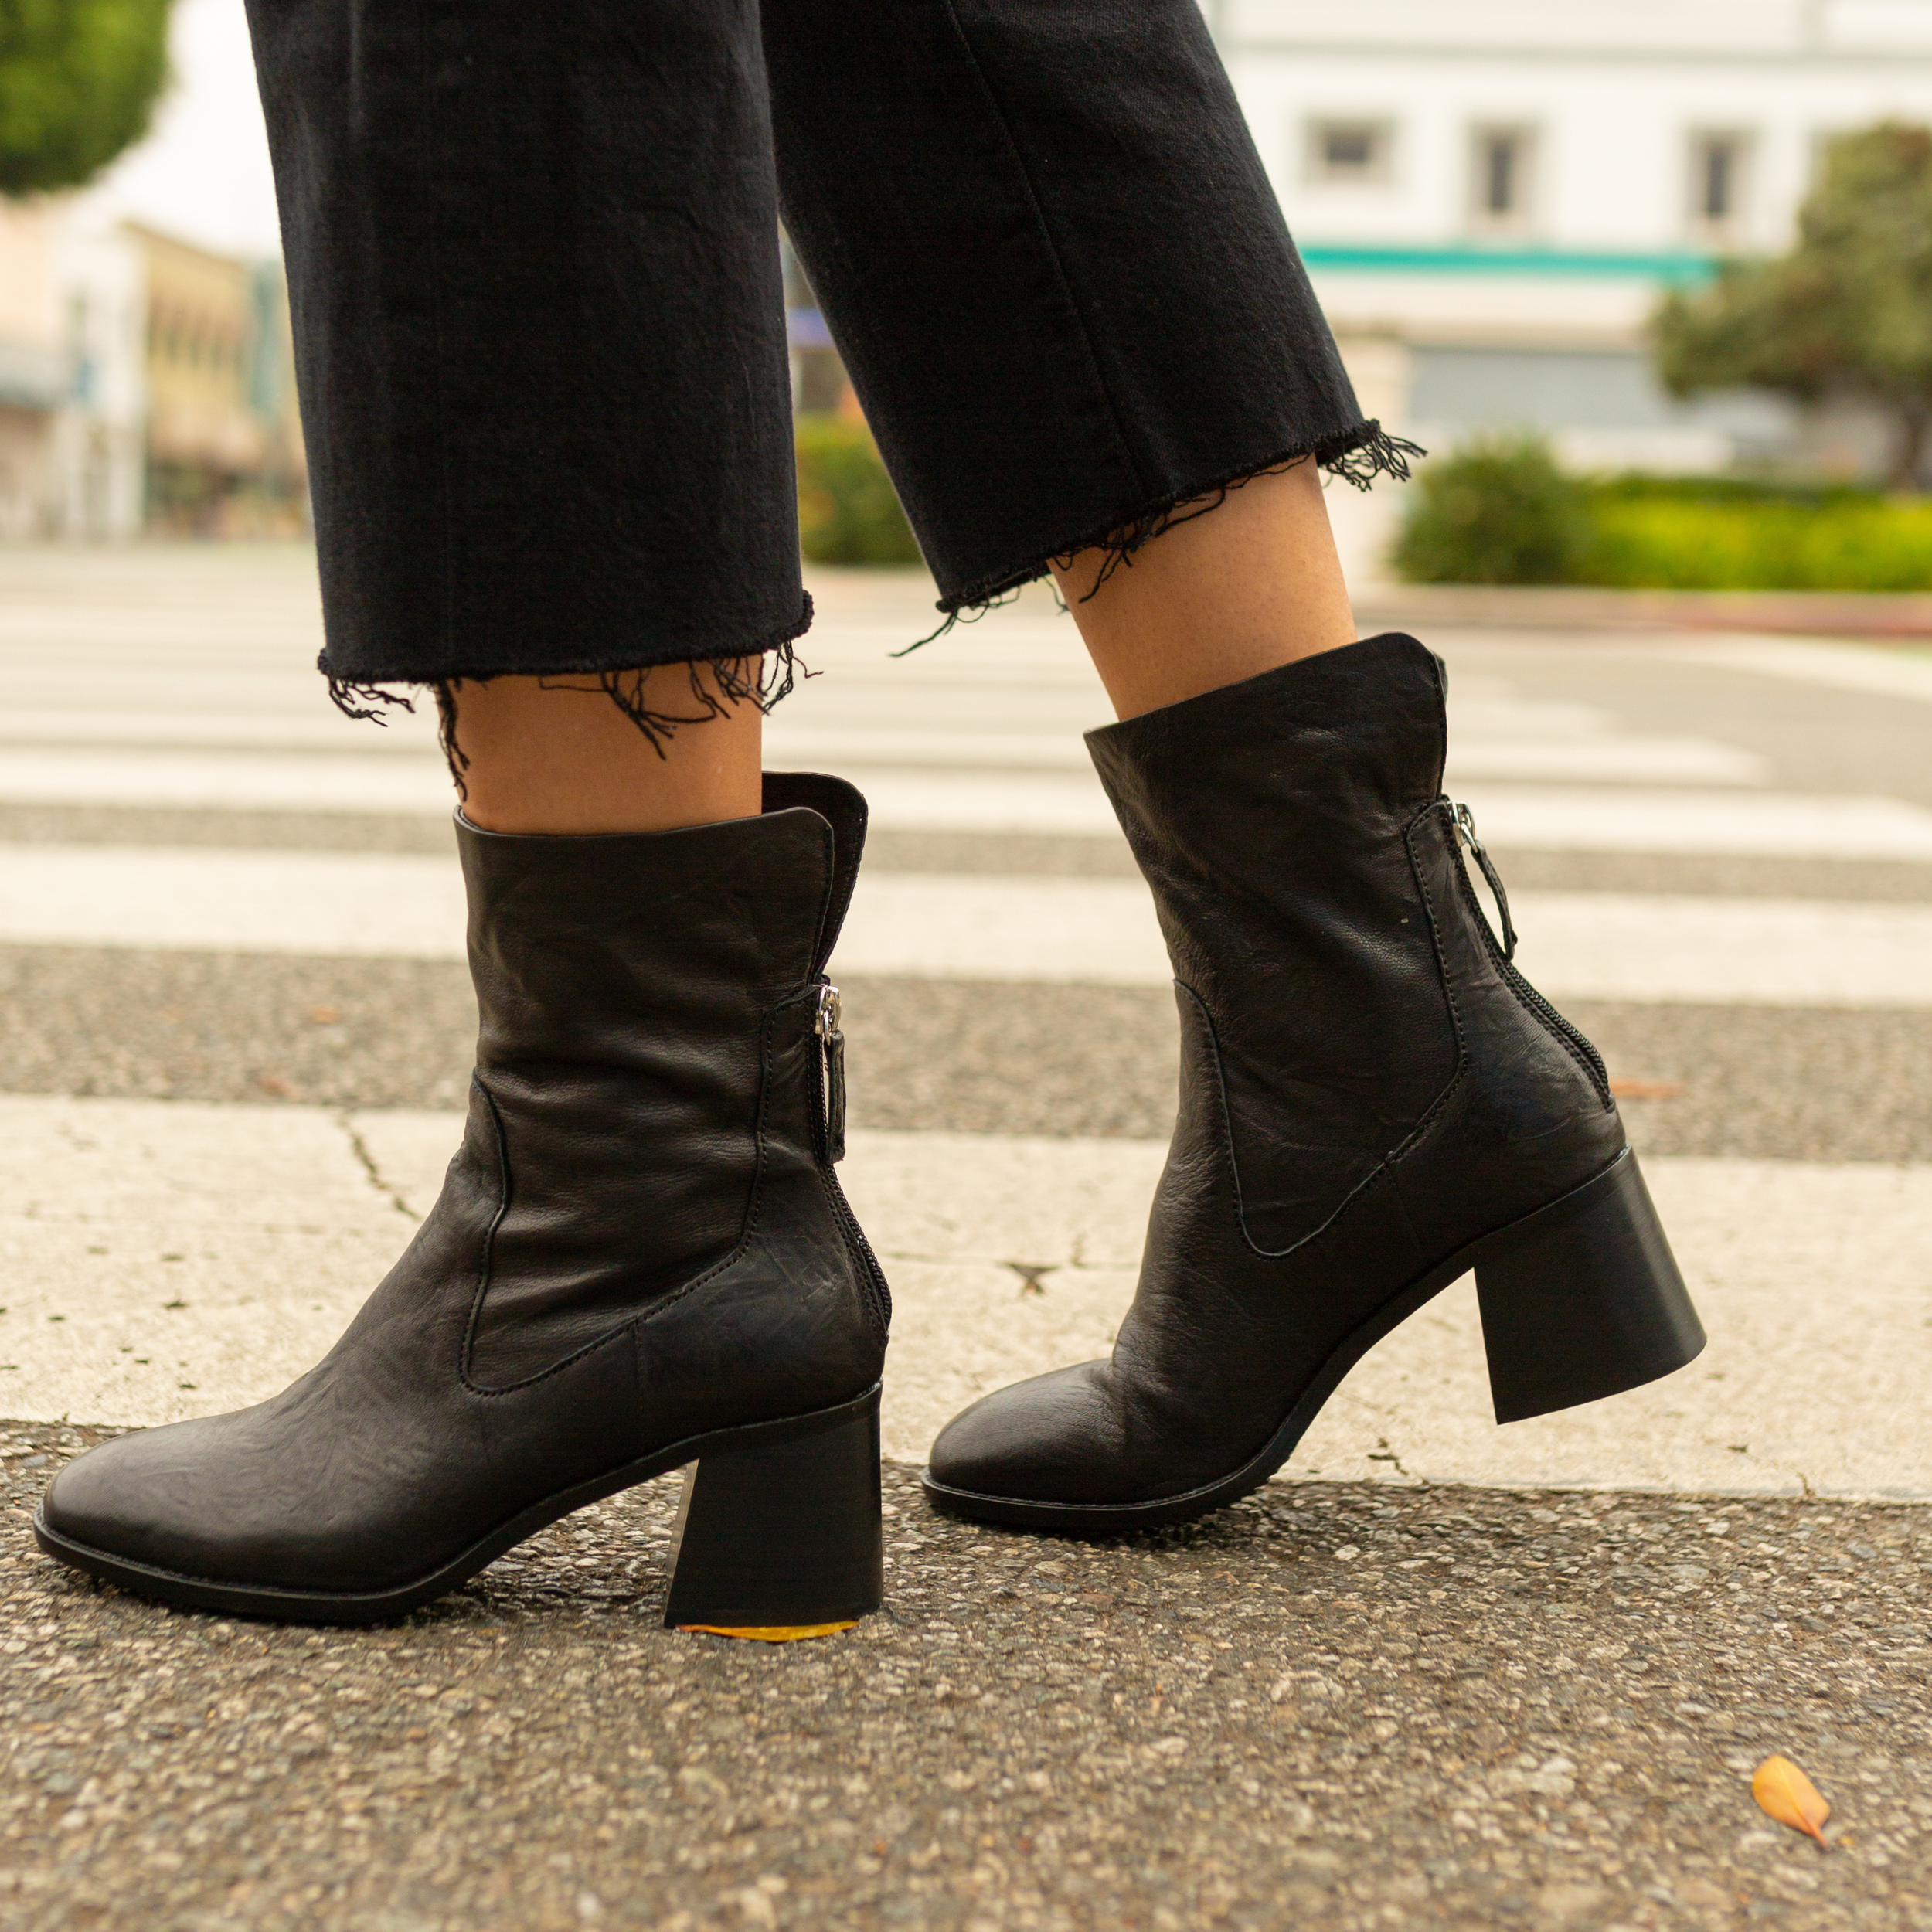 Heeled Ankle Boots | Wedge Heel Boots - Public Desire USA